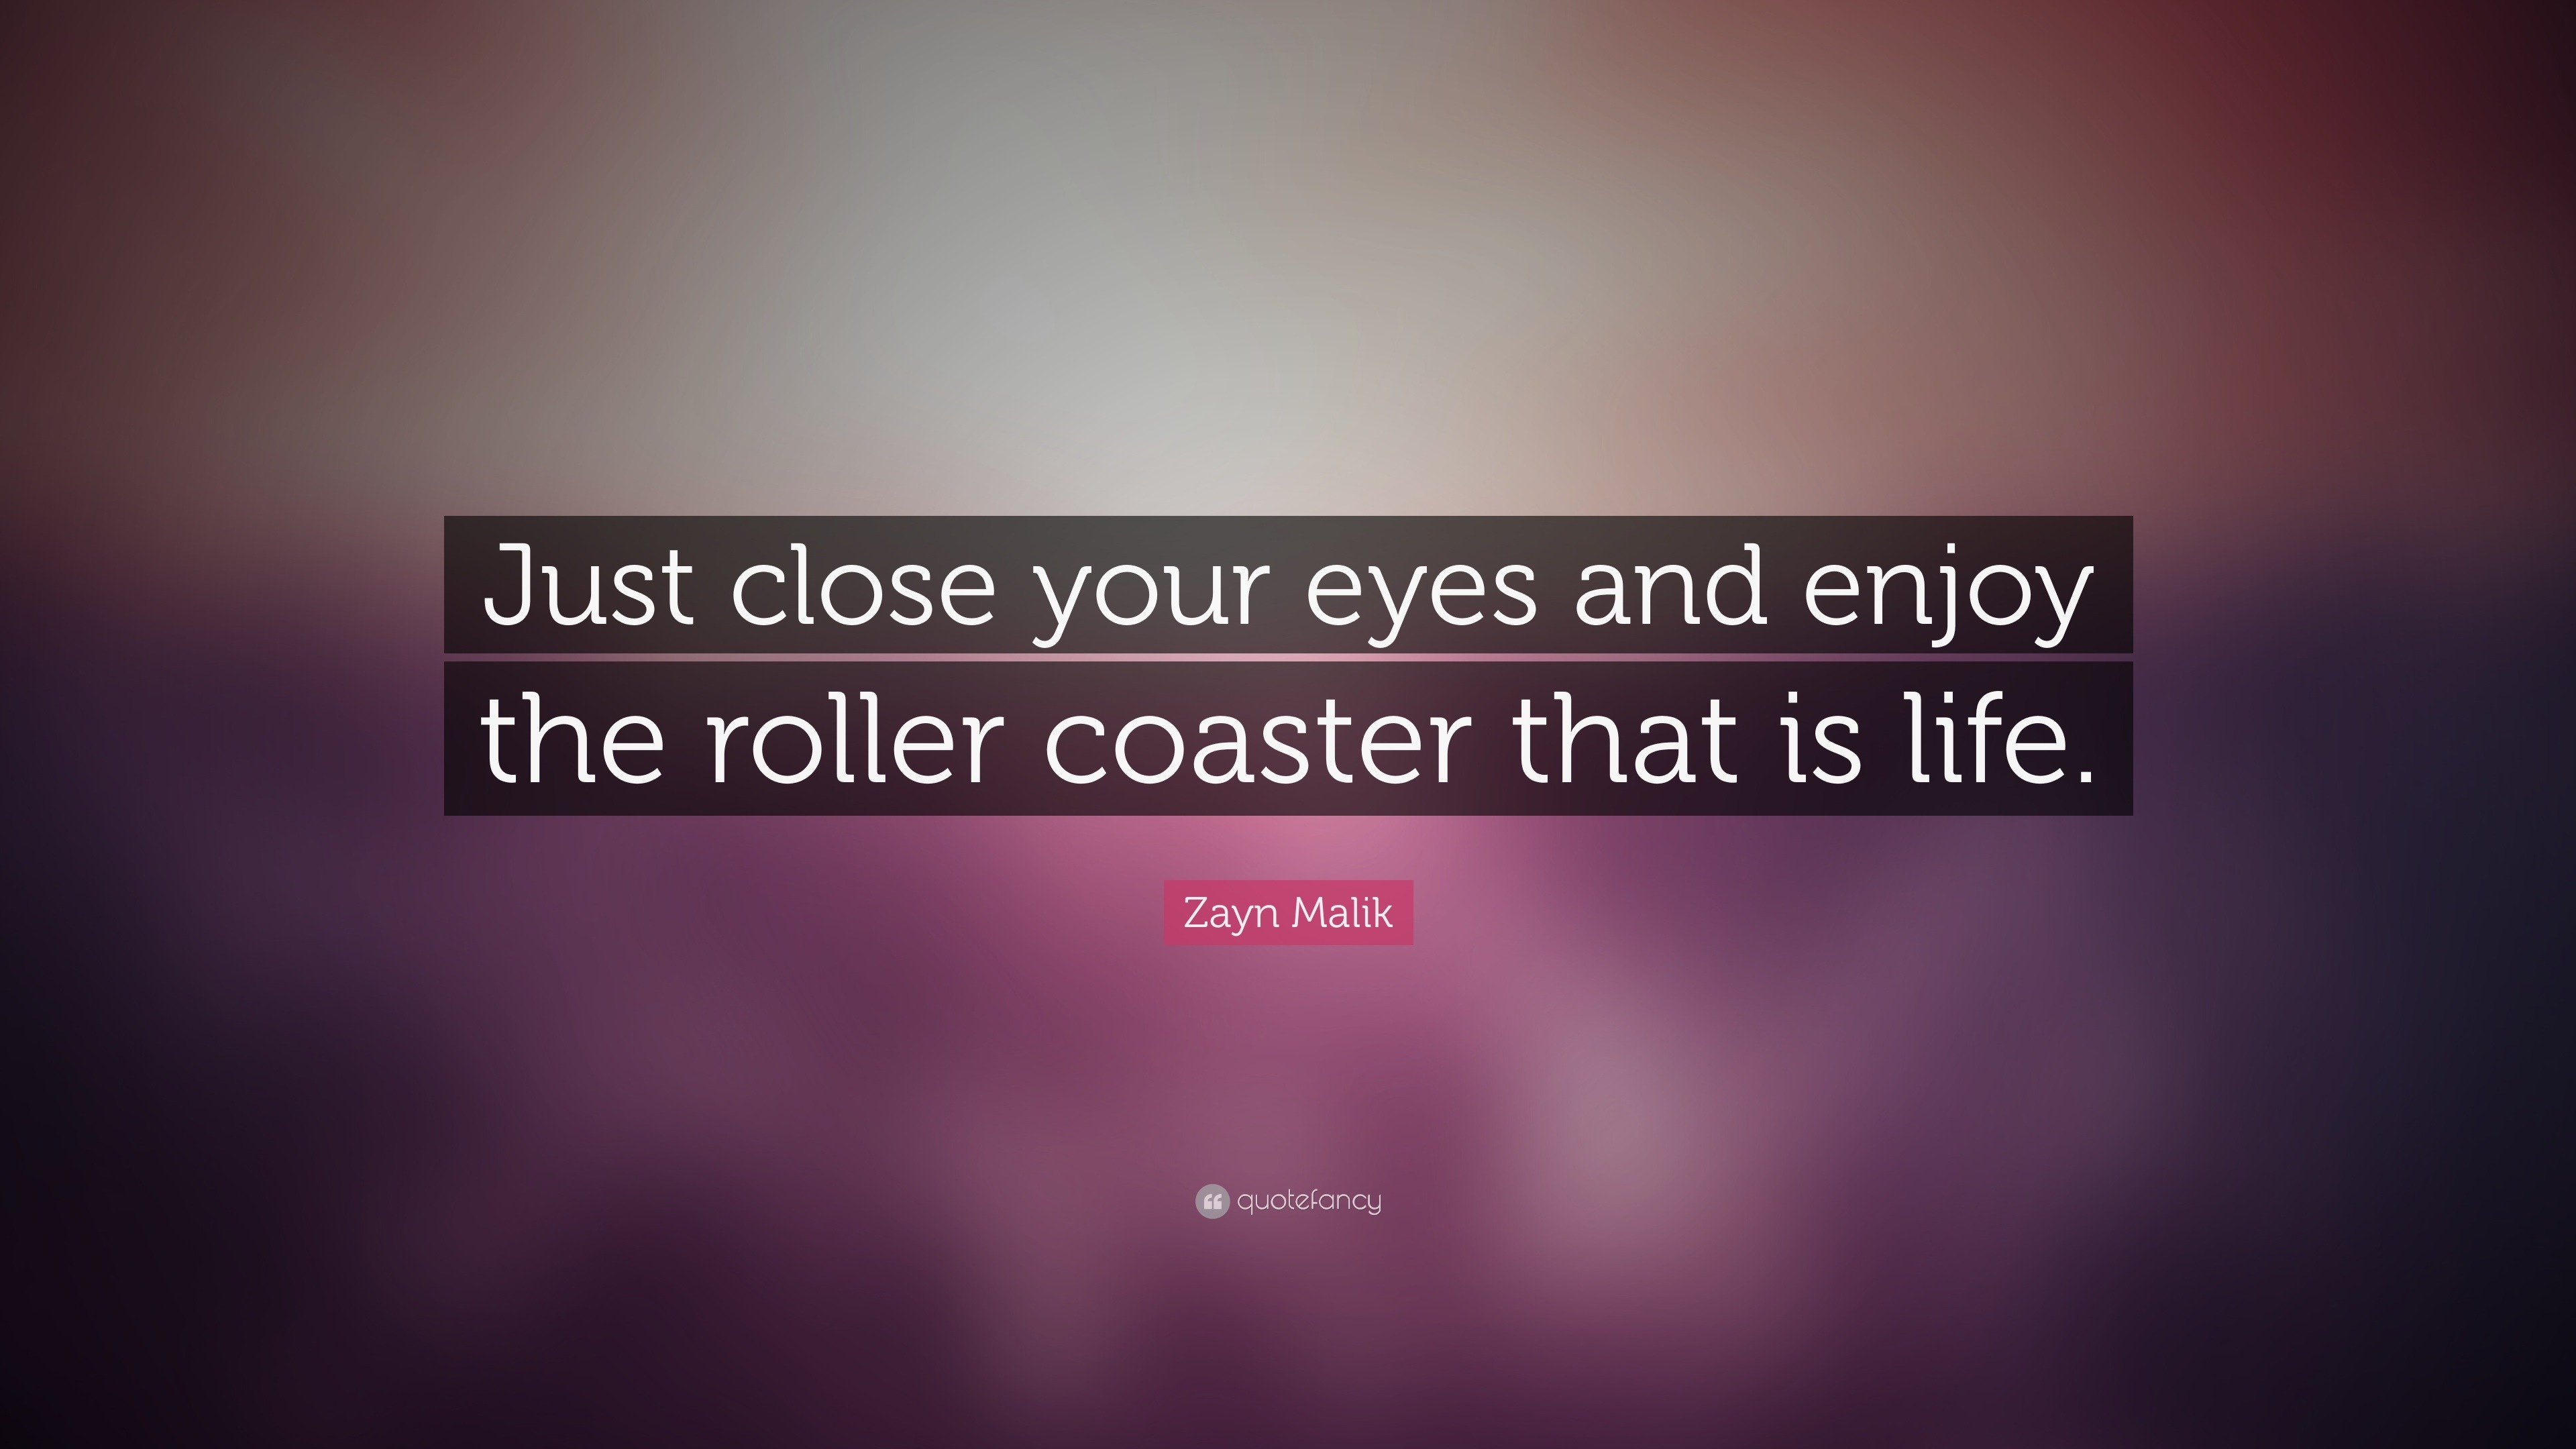 Zayn Malik Facts And Quotes